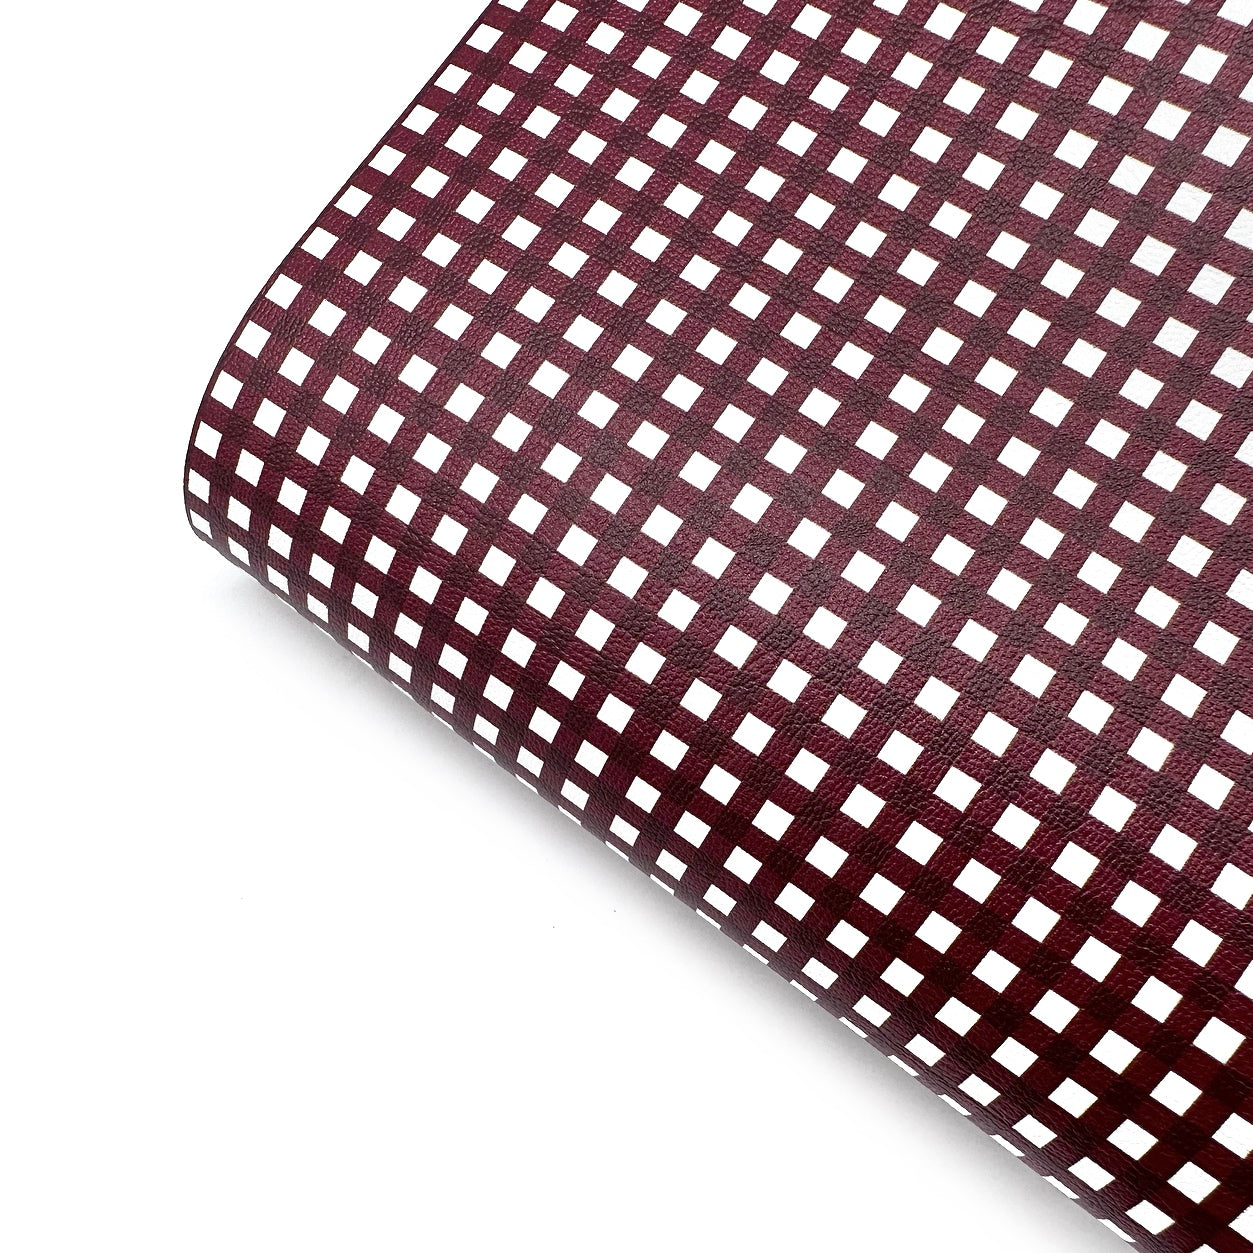 True Burgundy Gingham Standard Premium Faux Leather Fabric Sheets